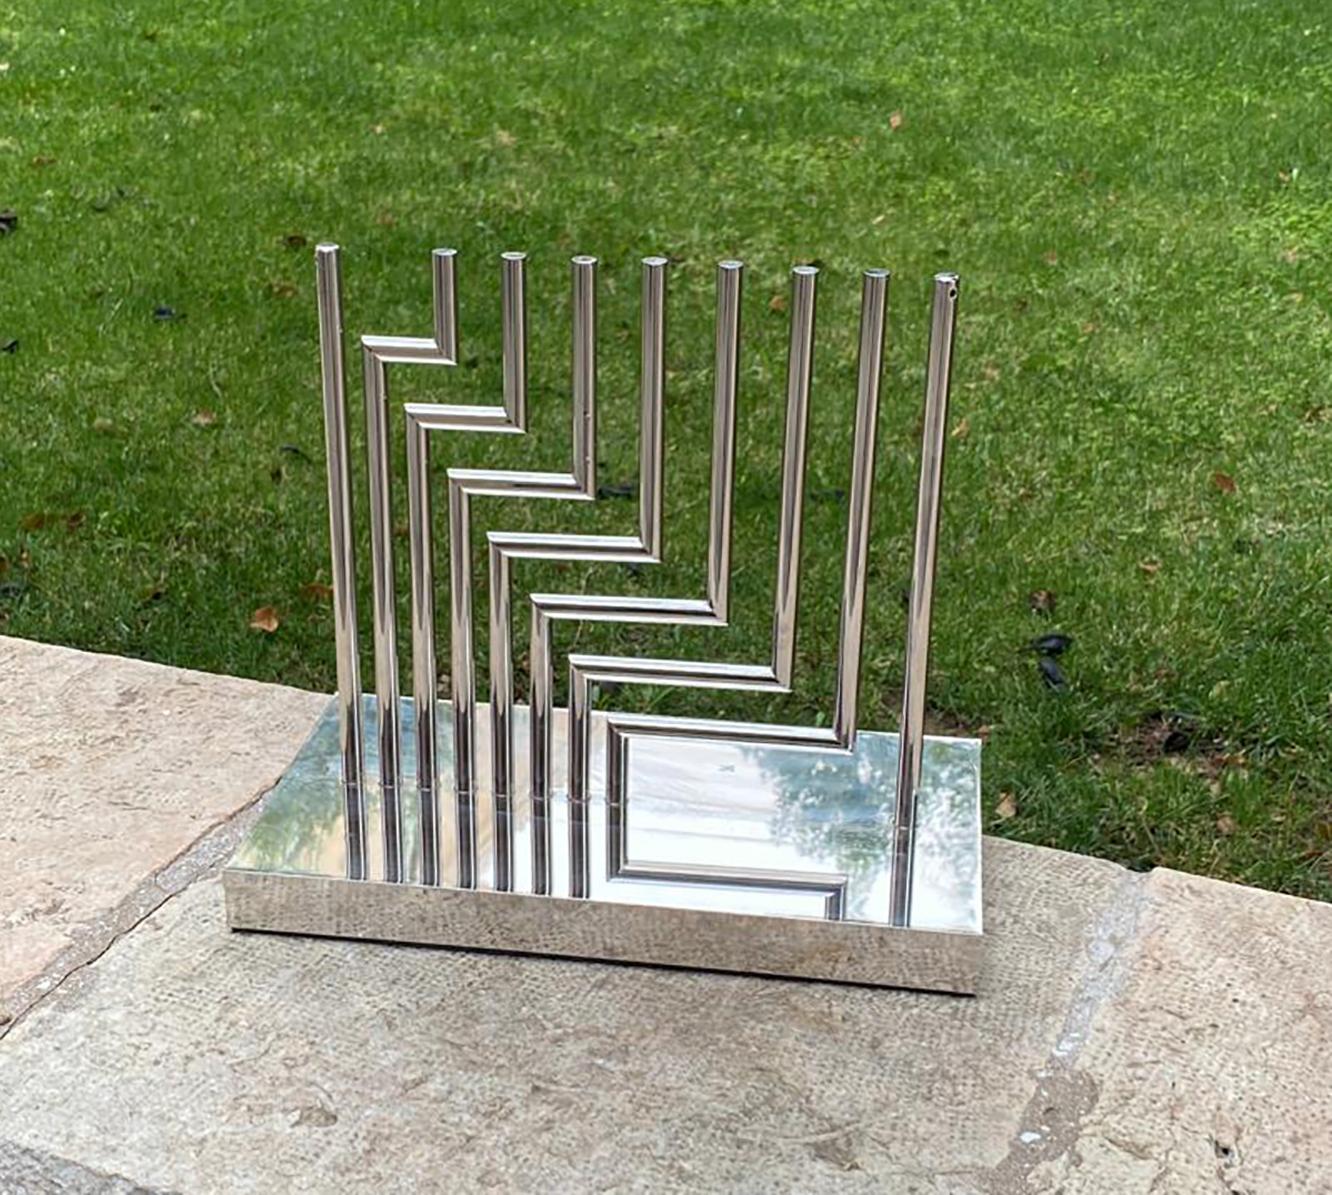 Brass silver colored Kinetic Chanukiah (Menorah) by the well known Israeli artist Yaacov Agam. the chanukiah comes with the candle holder. signed and numbered by the artist.
